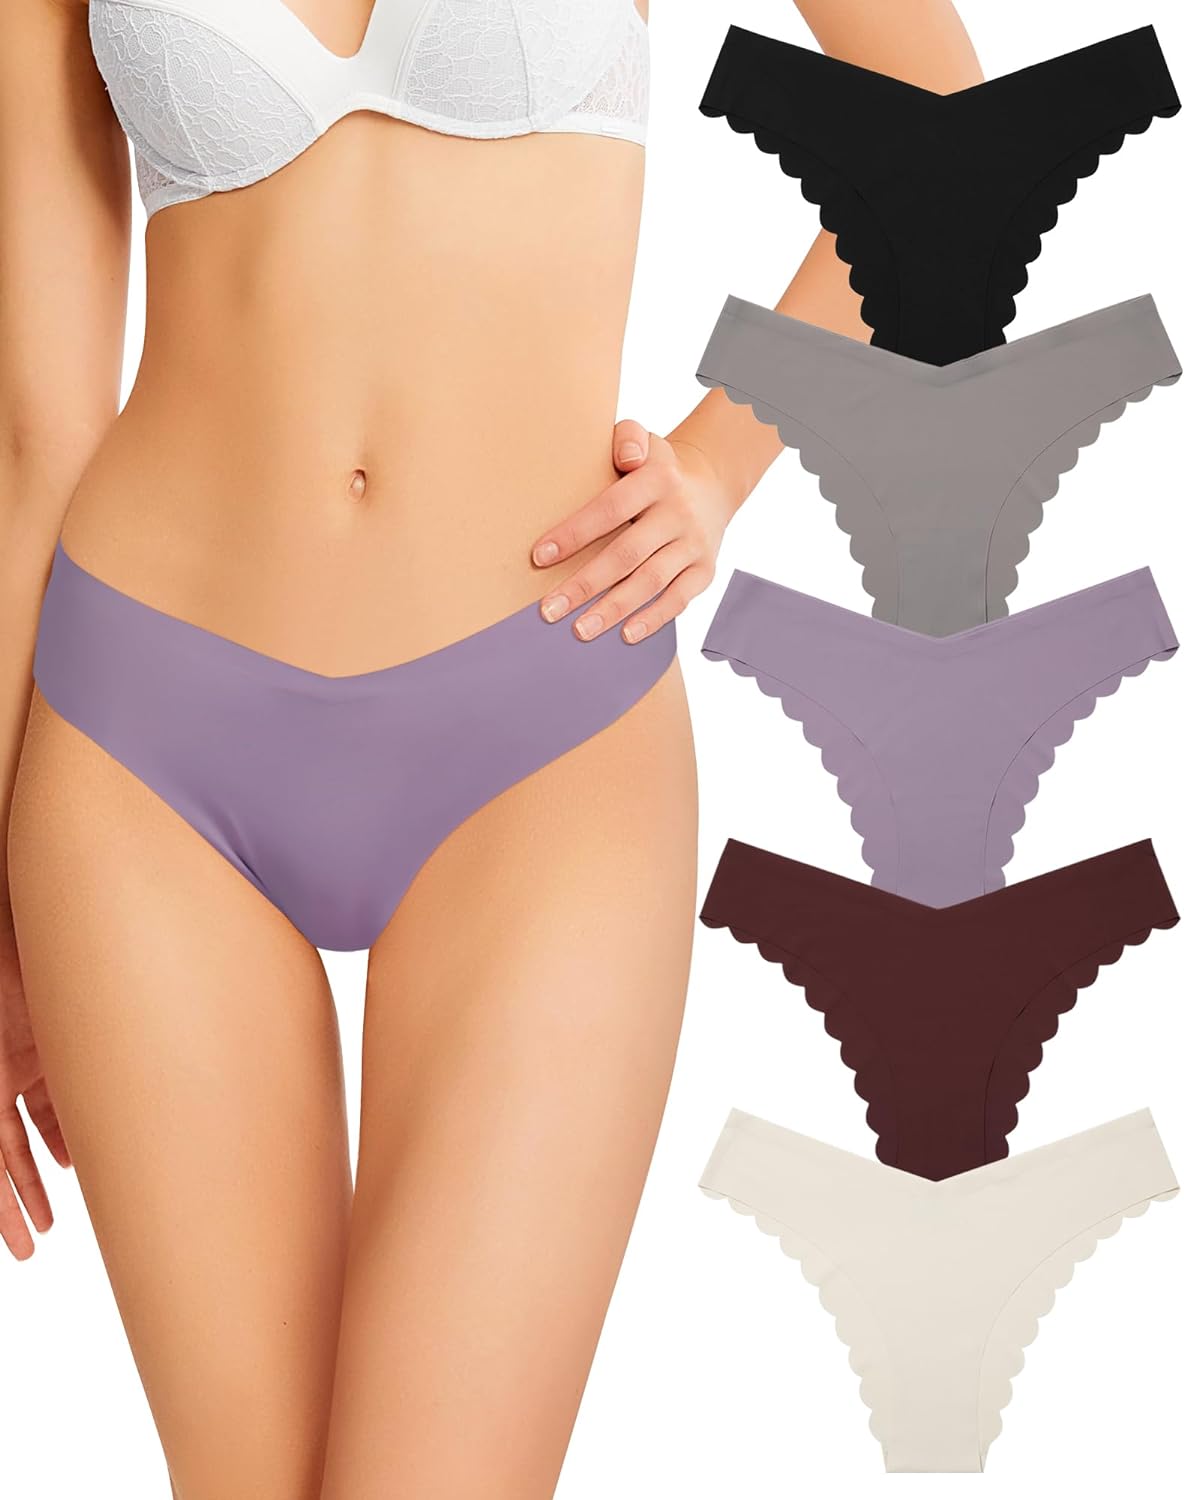 LEVAO Women Seamless Hipster Cheeky Bikini No Show Underwear Sexy Stretch V-Waist Hipster Wavy Sides Invisible Panties 7 Pack